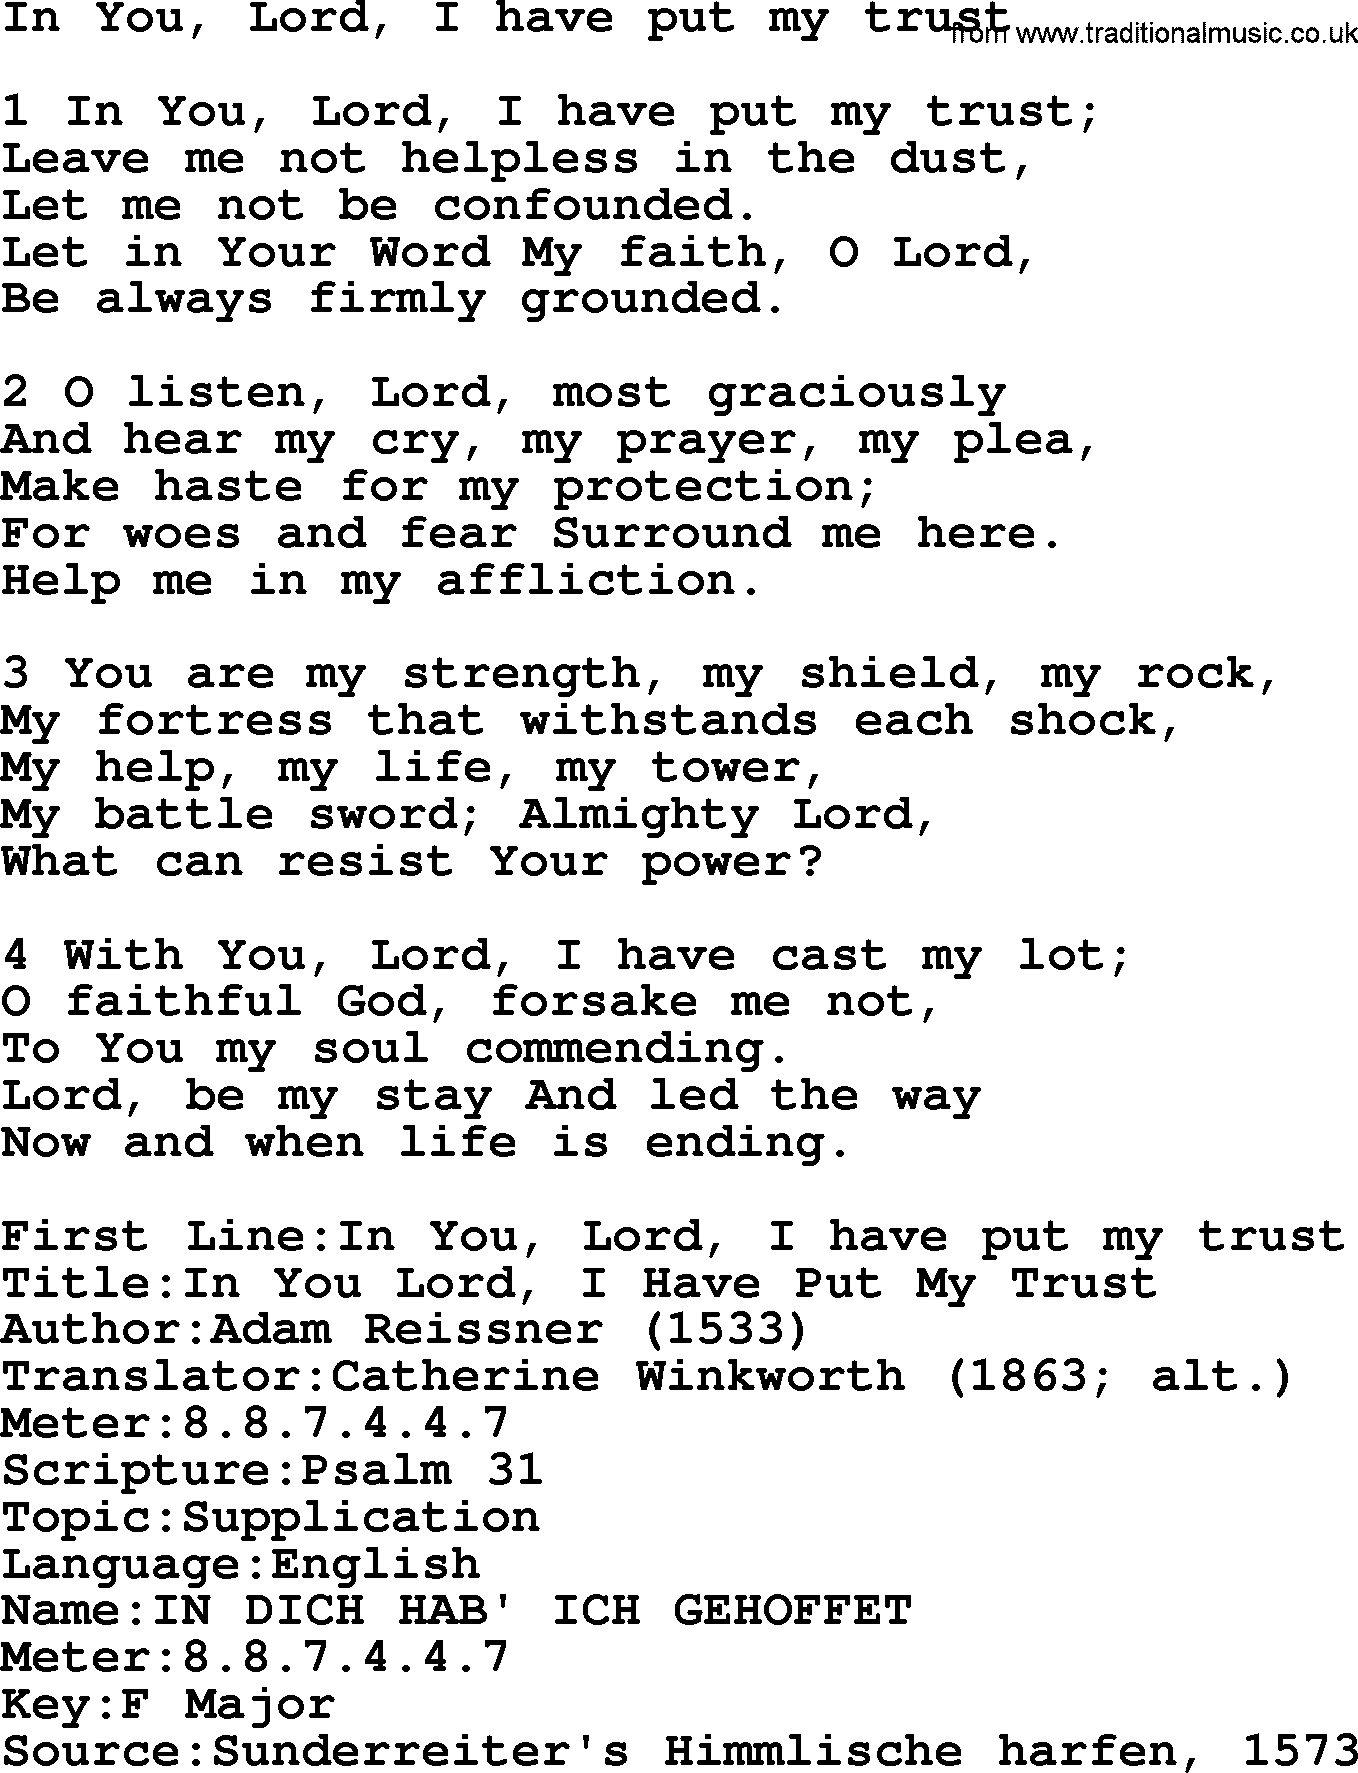 Presbyterian Hymns collection, Hymn: In You, Lord, I Have Put My Trust, lyrics and PDF